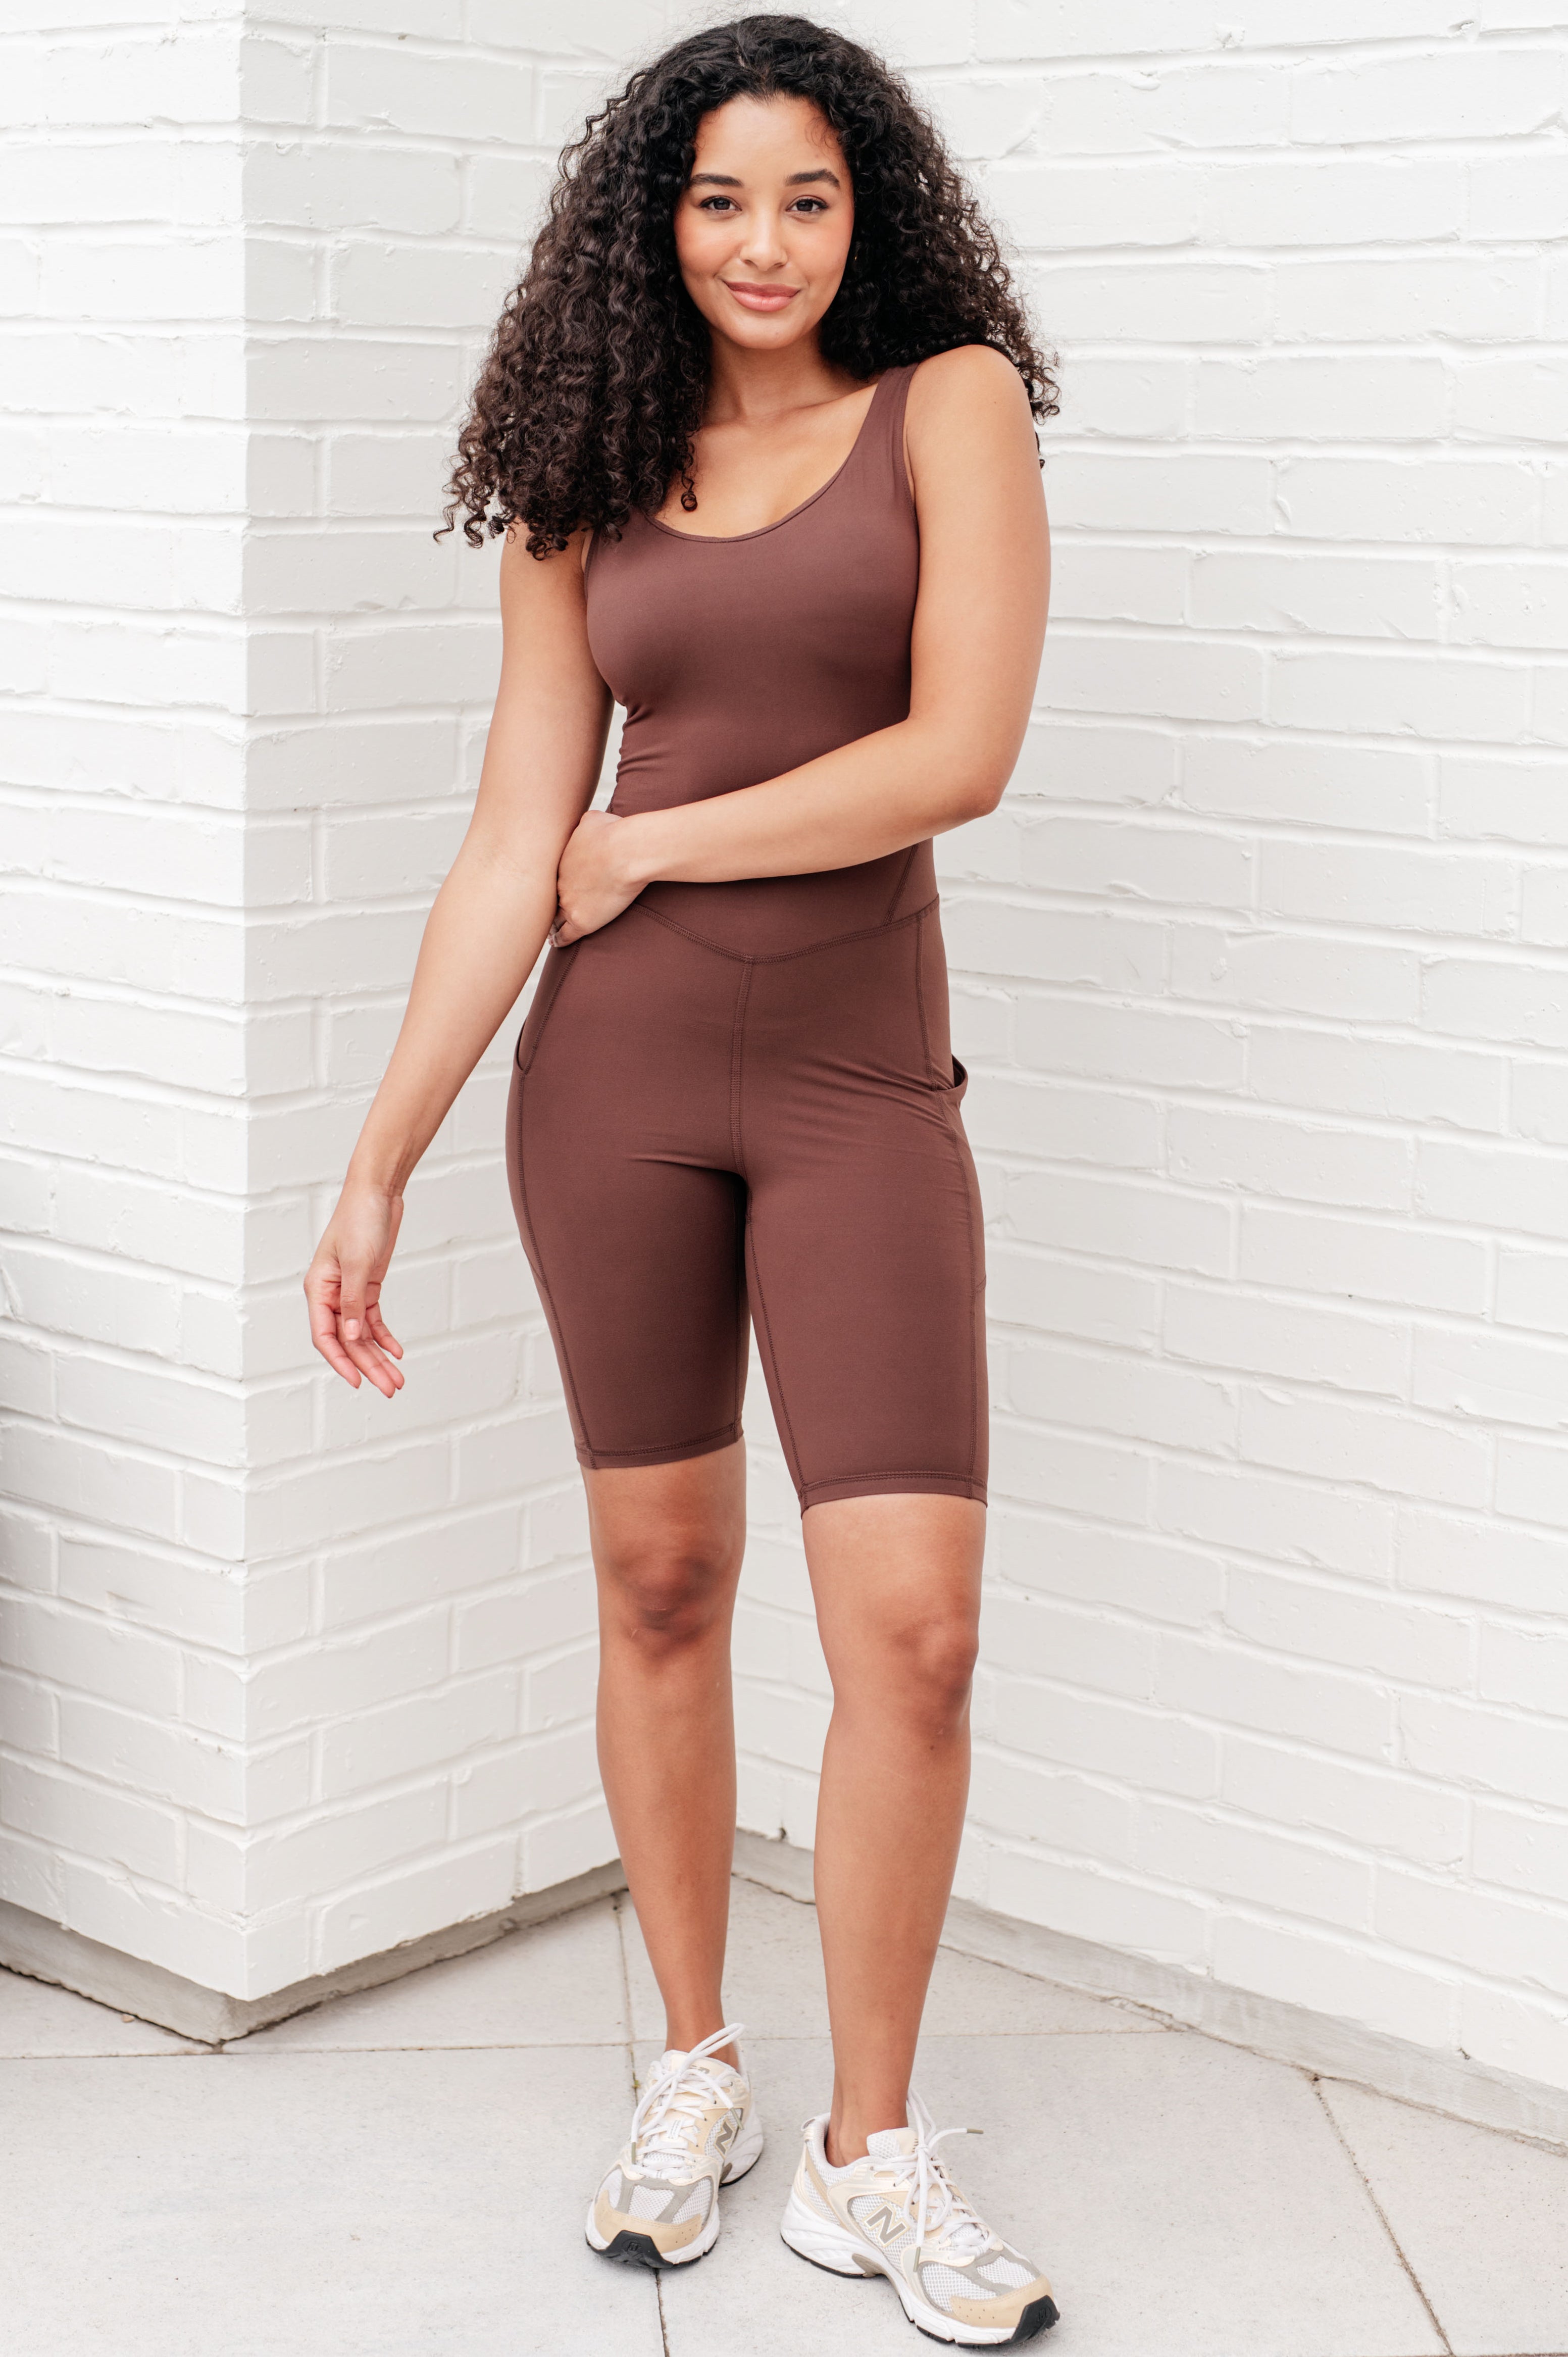 Sun Salutations Body Suit in Java Athleisure Ave Shops   